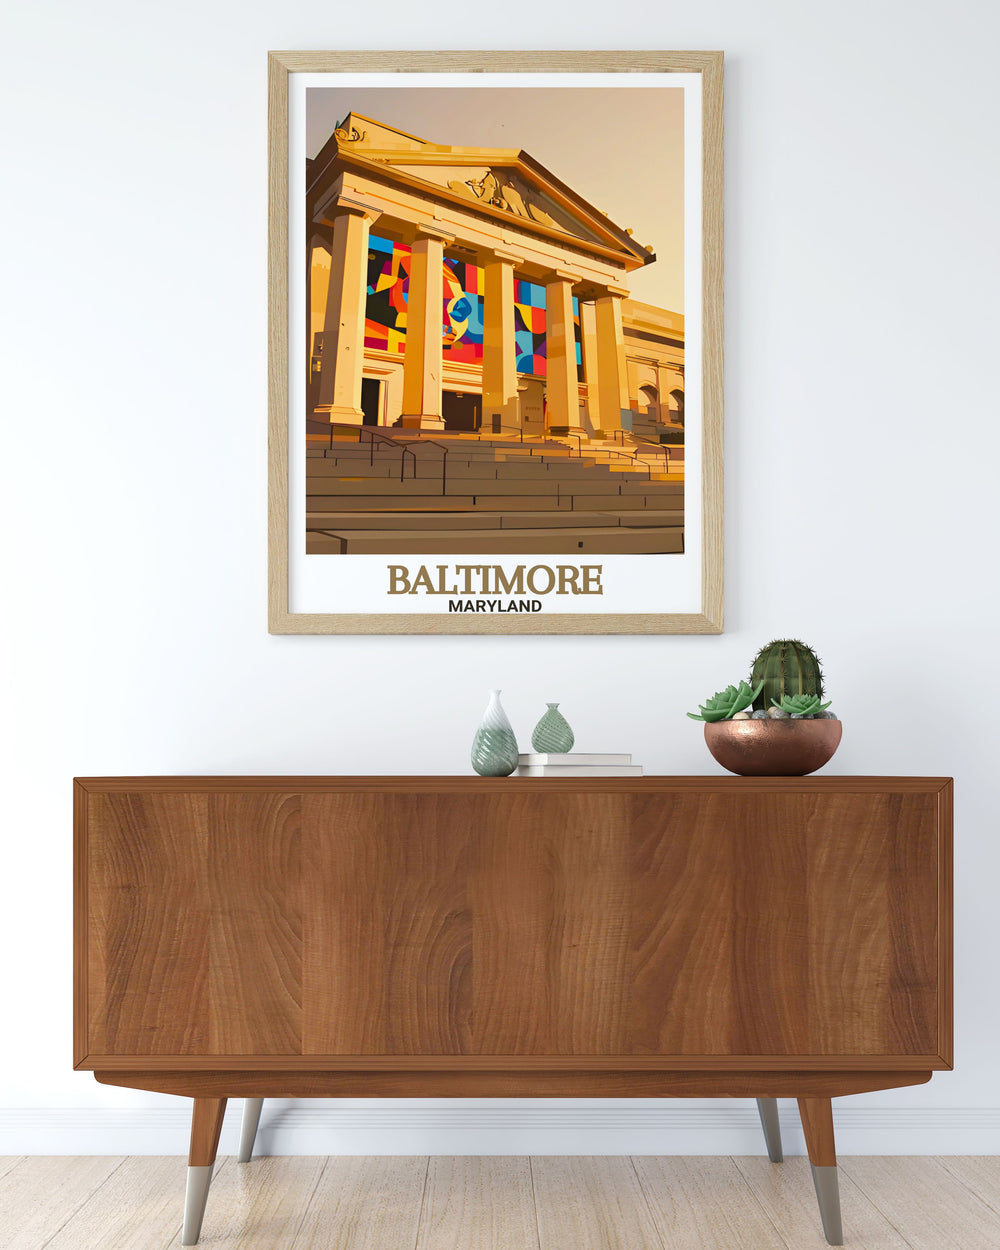 Elegant Baltimore Museum of Art wall art featuring a vintage print that showcases the beauty and history of Baltimore ideal for enhancing any living space with a touch of class and timeless charm a perfect gift for any occasion